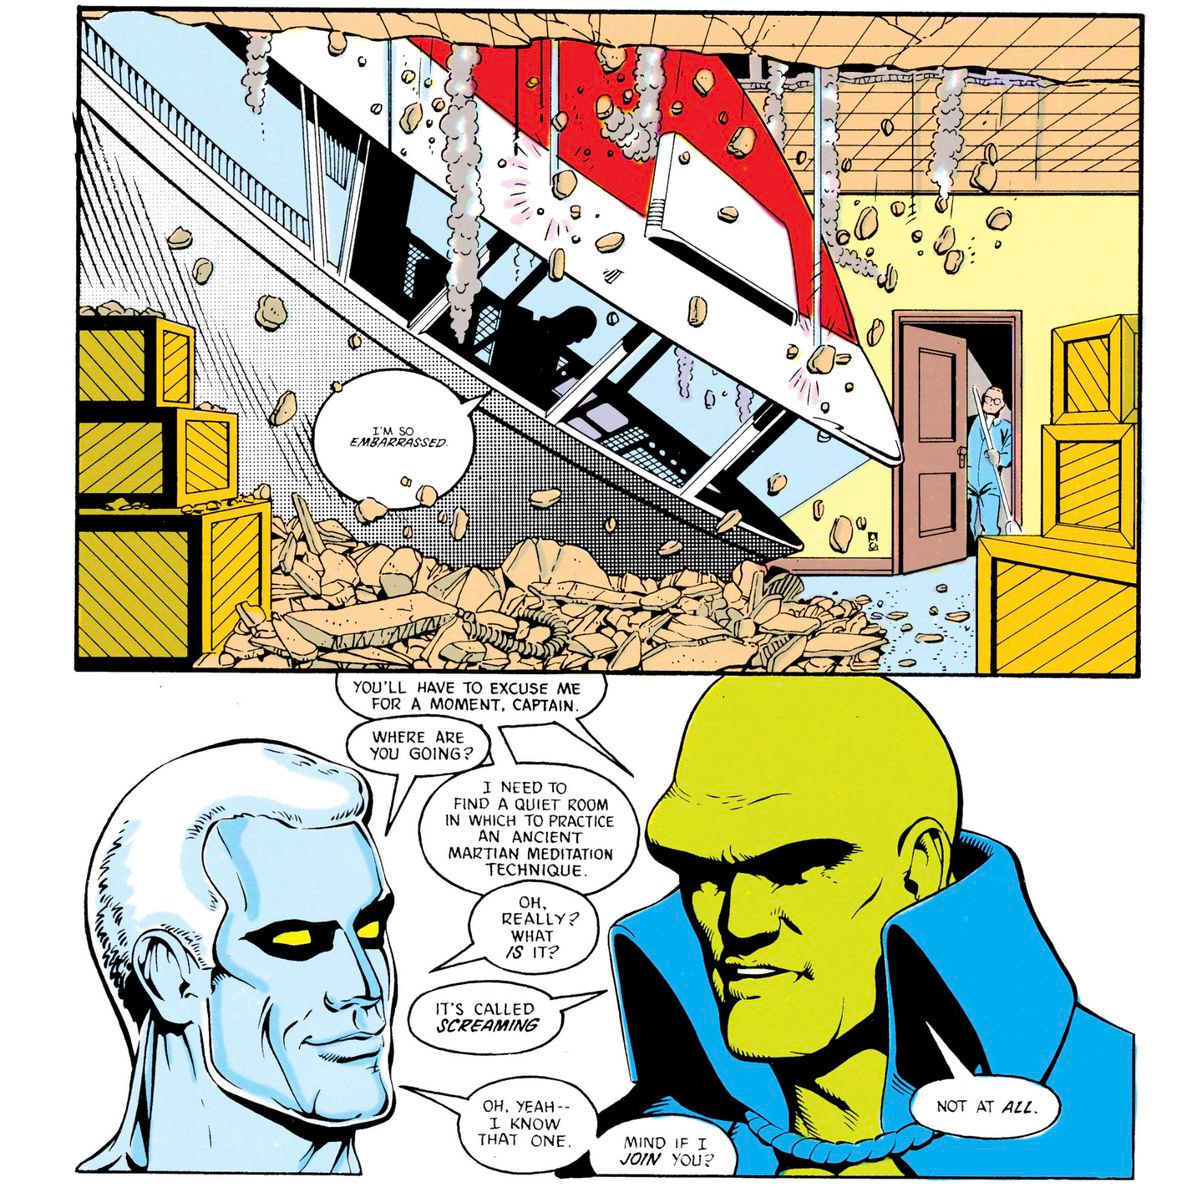 A huge craft smashes through the ceiling of a building storeroom. In the next panel, the Martian Manhunter invites Captain Atom to join hm in “an ancient Martian meditation technique [...] It is called screaming.” 